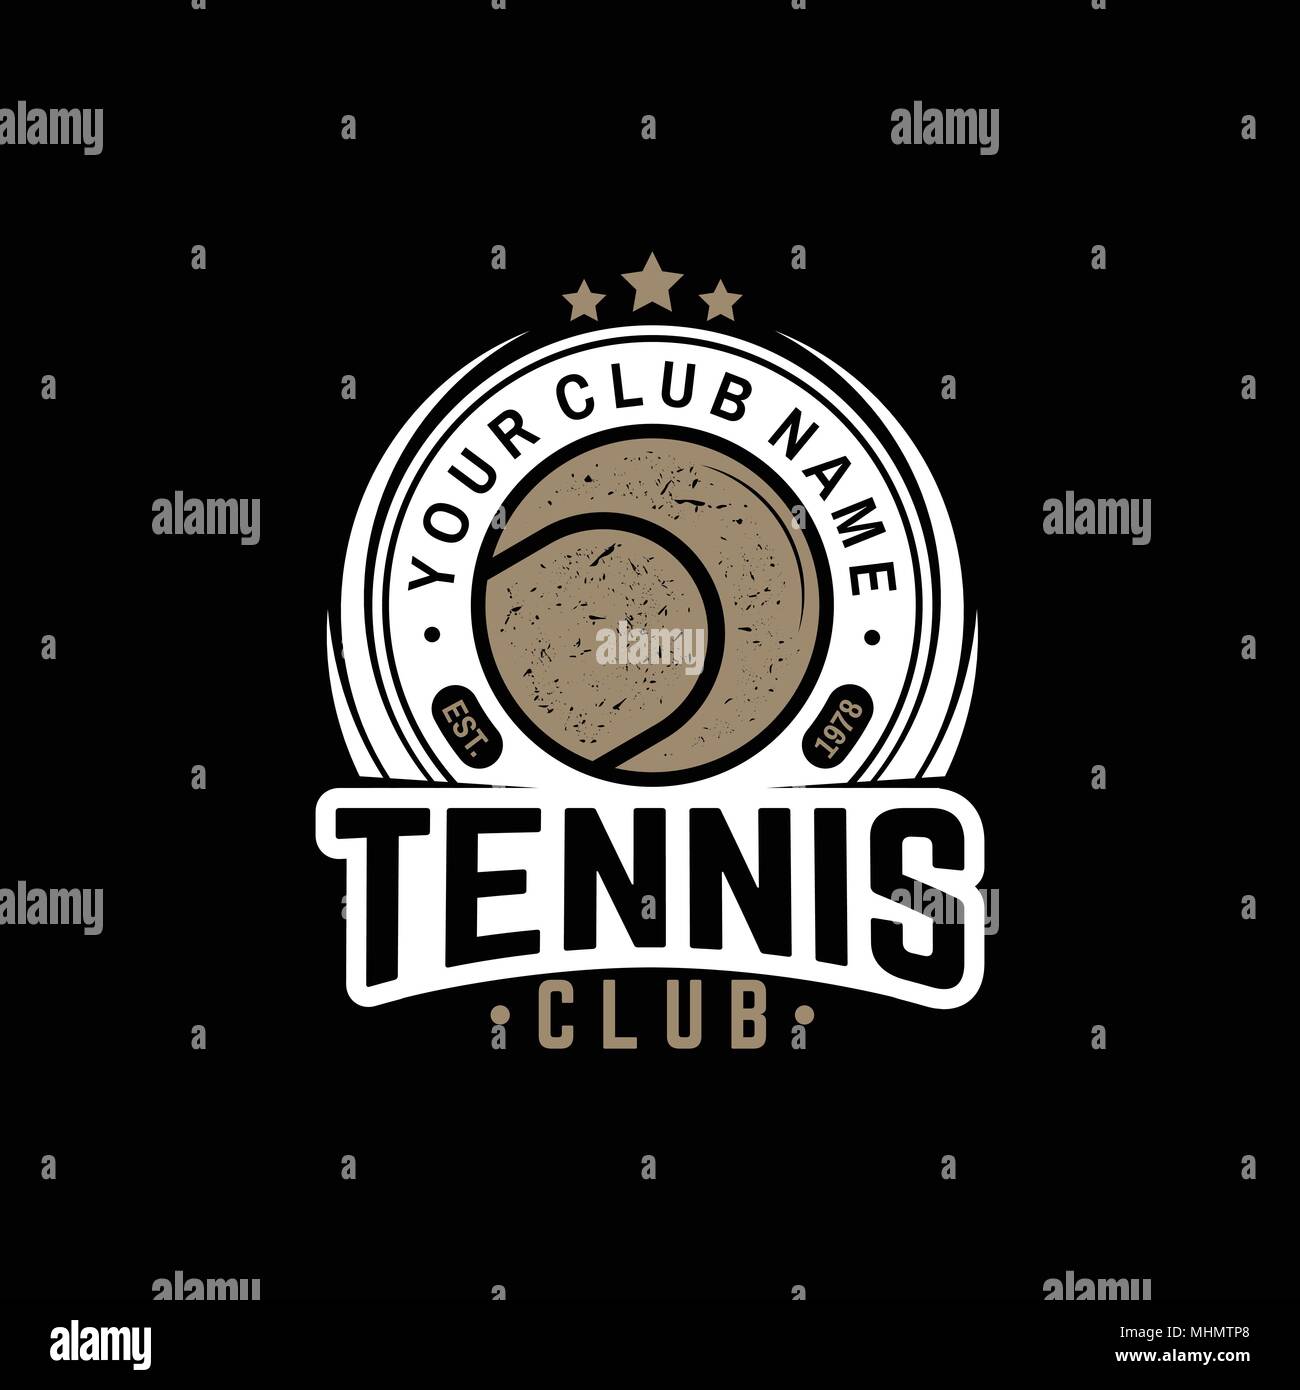 Tennis club. Vector illustration. Concept for shirt, print, stamp or tee. Vintage typography design with tennis ball silhouette. Stock Vector